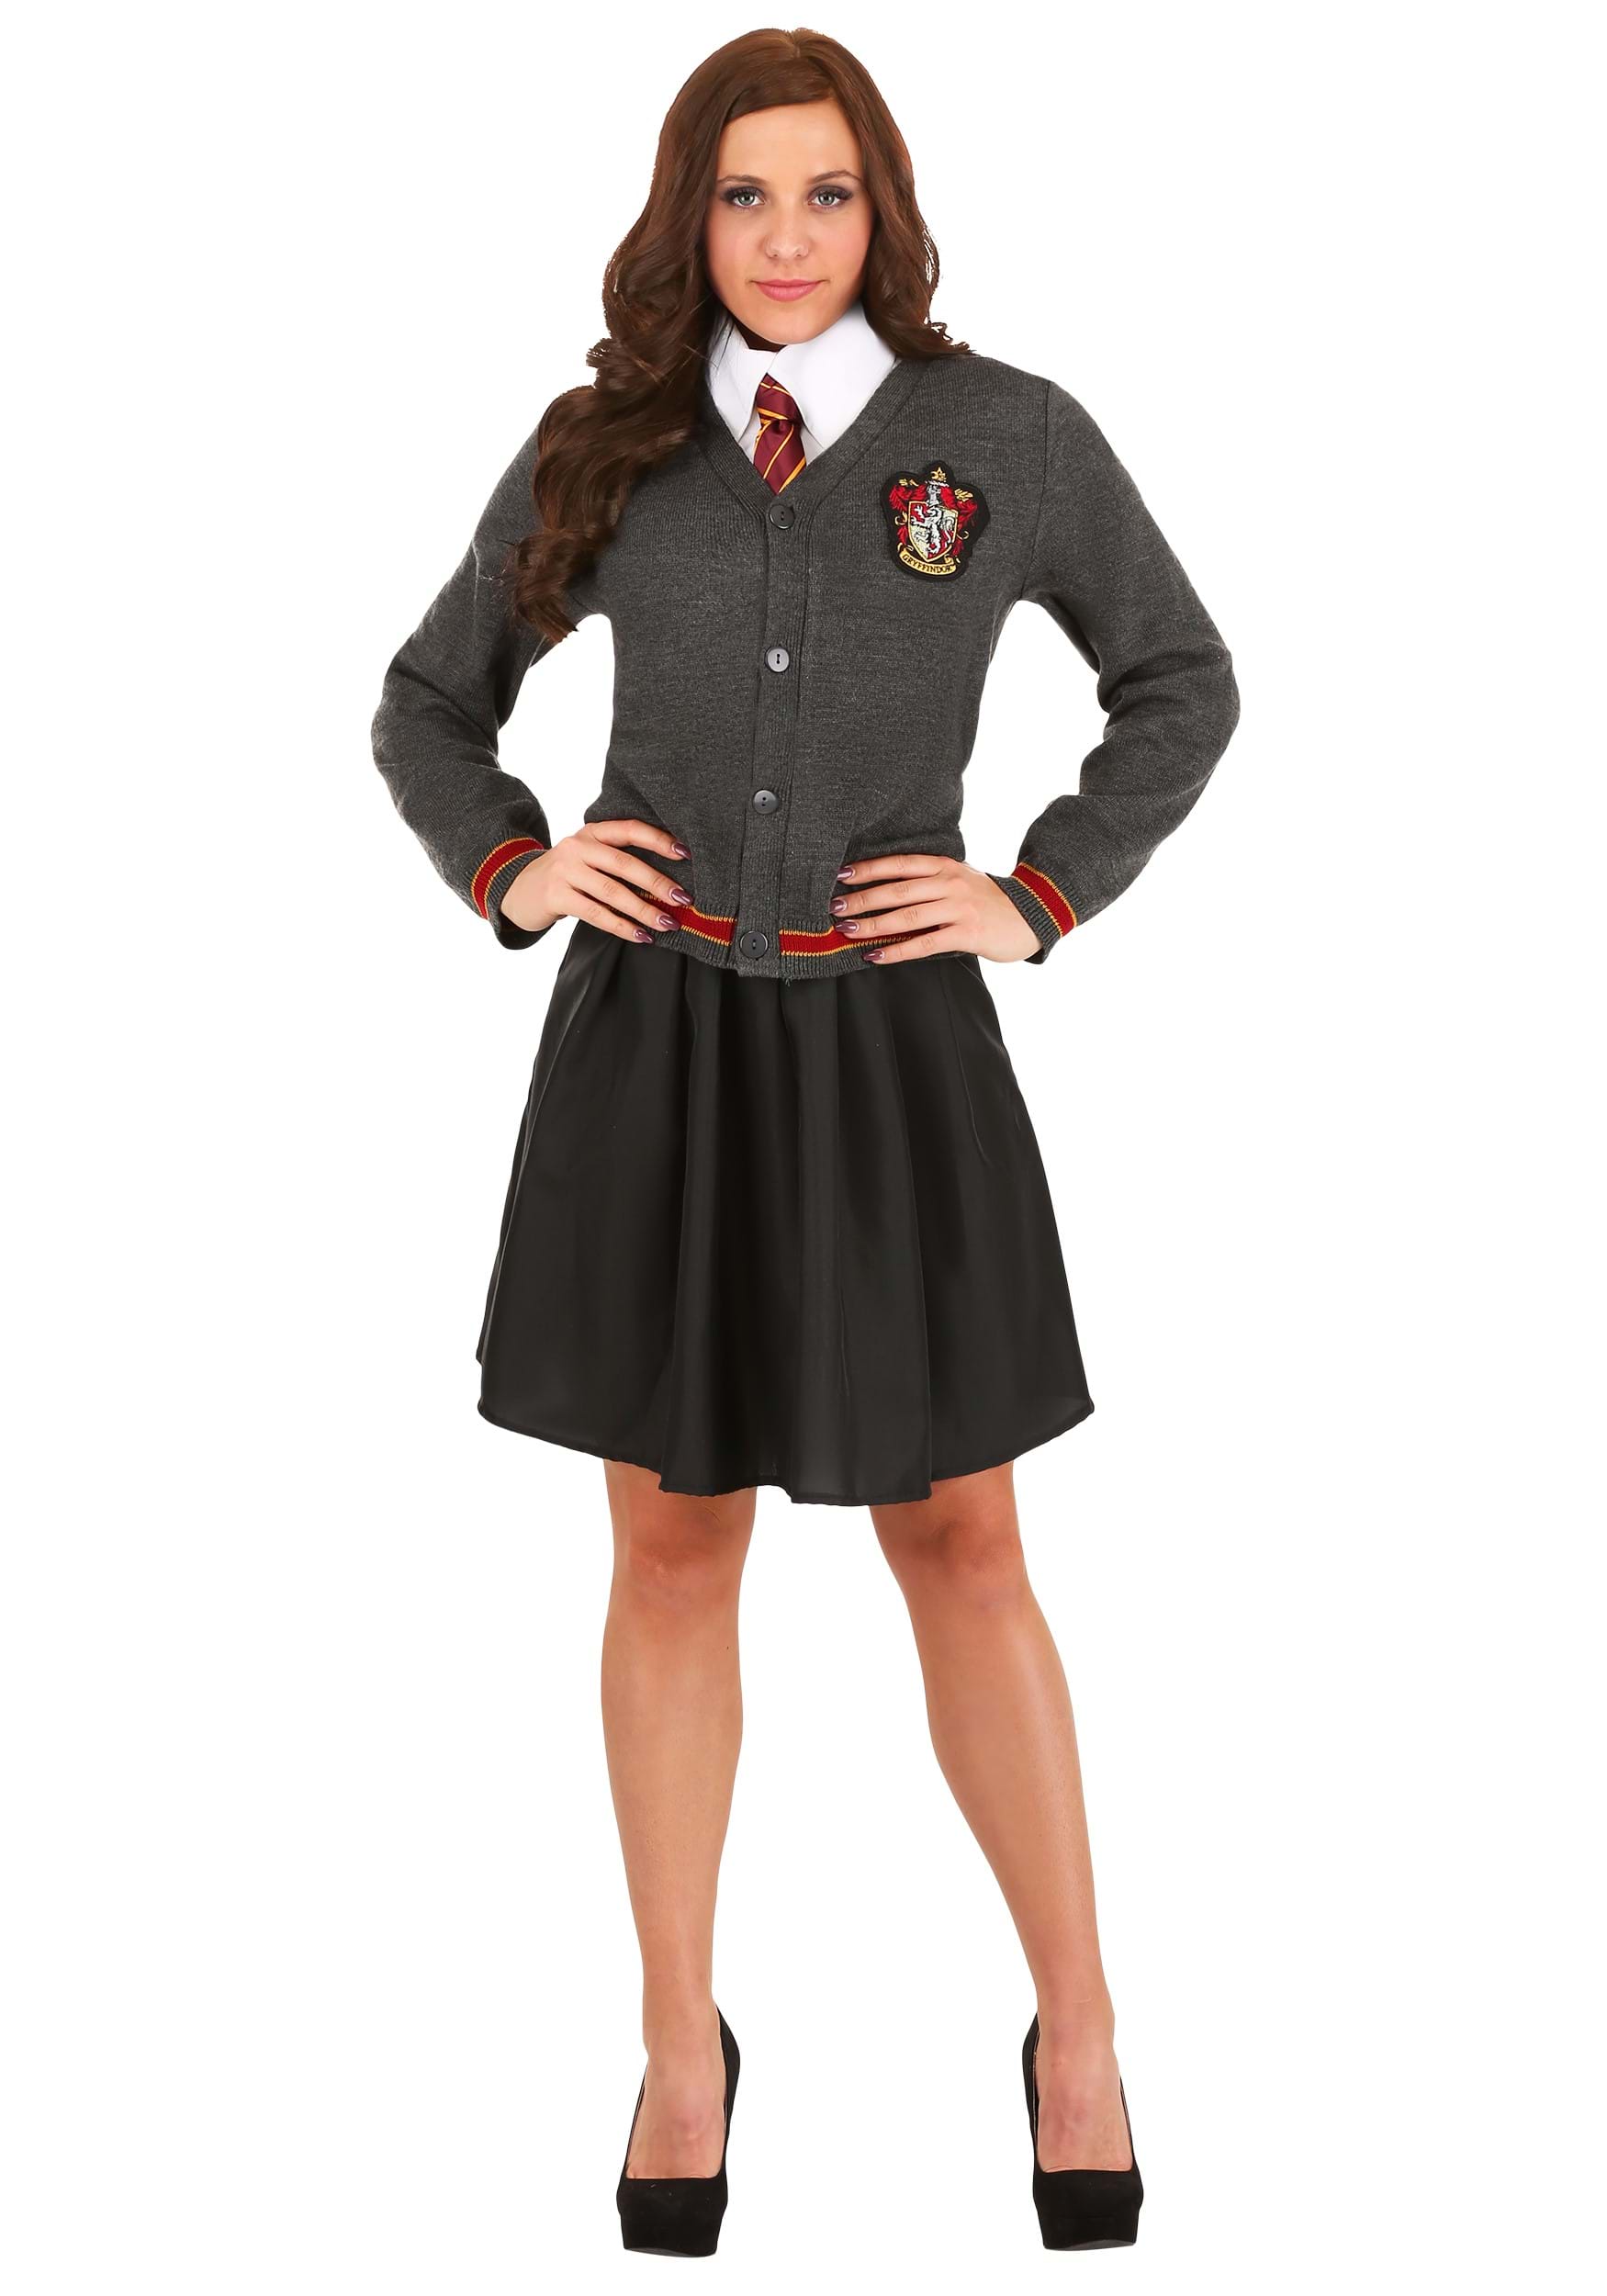 https://images.halloweencostumes.ca/products/64160/2-1-299302/plus-size-deluxe-harry-potter-hermione-costume-alt-1.jpg